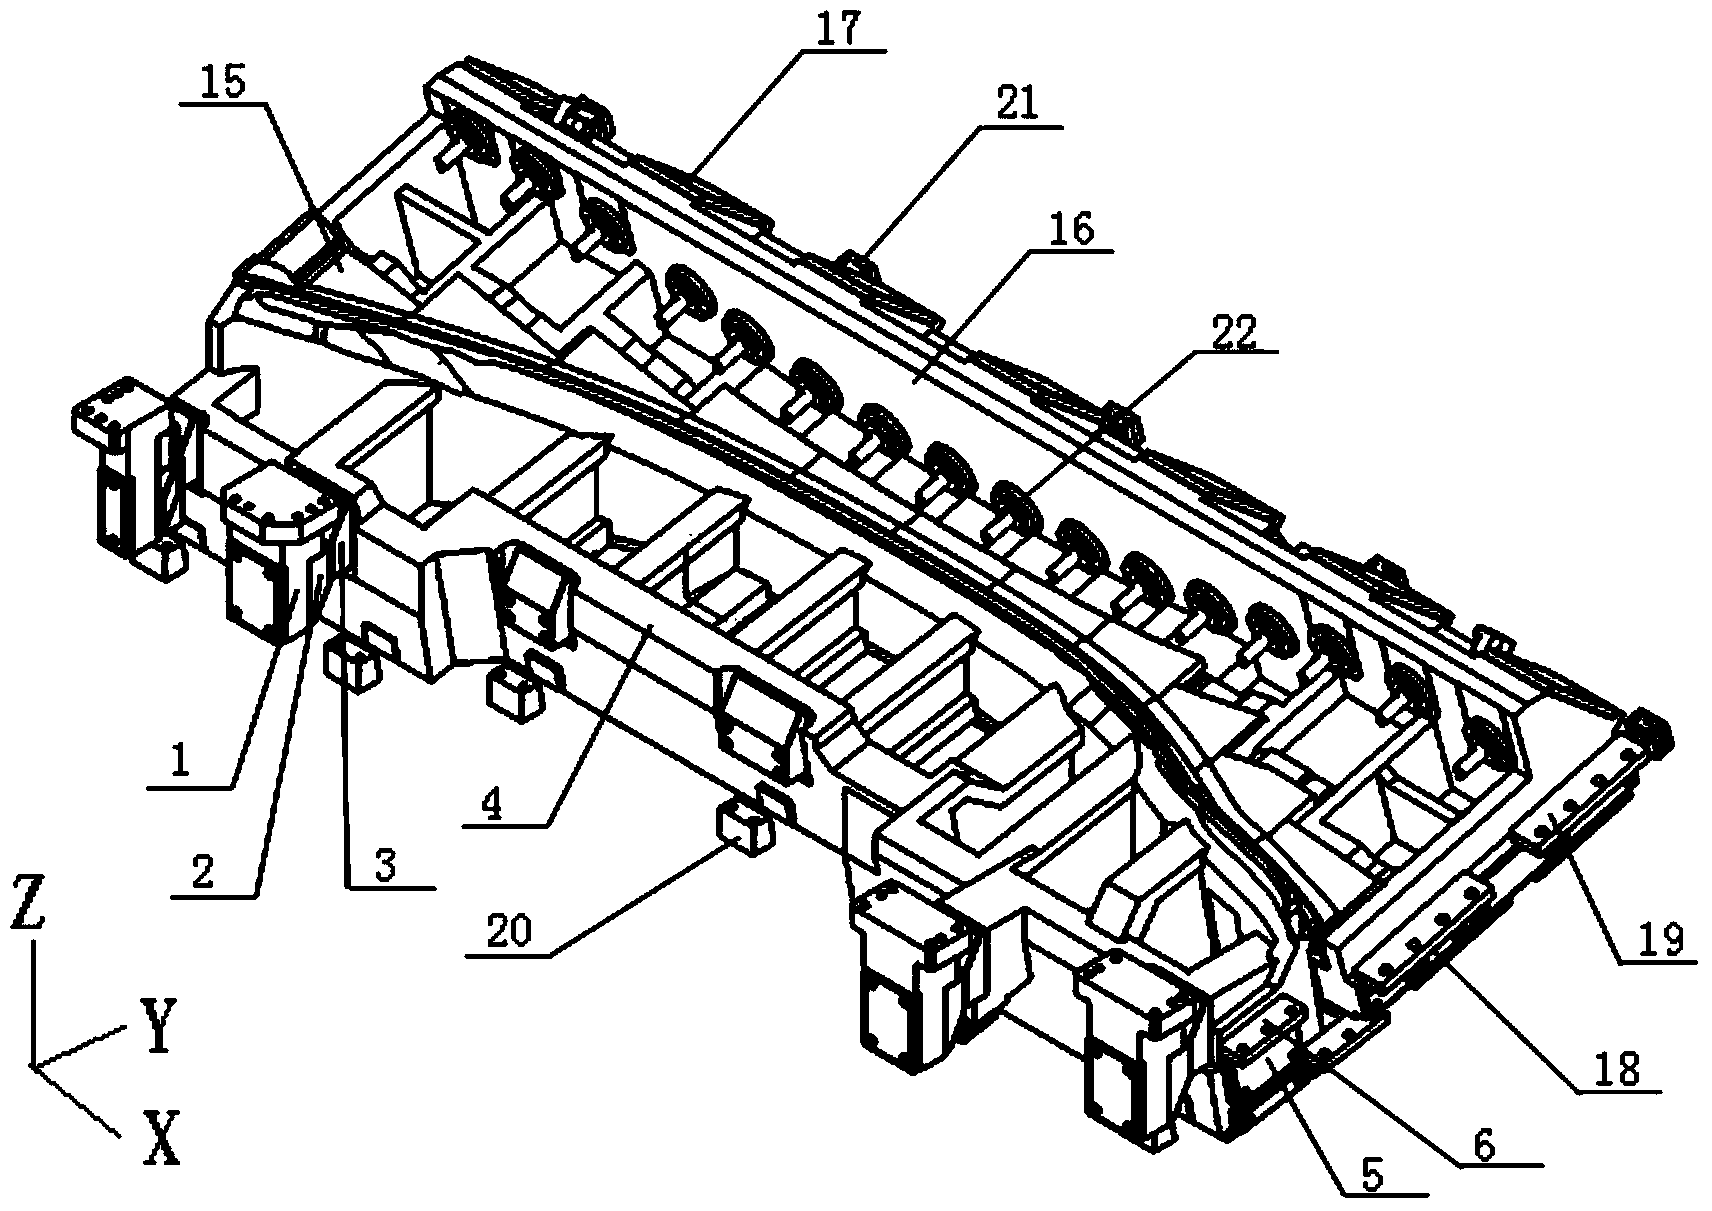 Lateral shaping tapered wedge mechanism